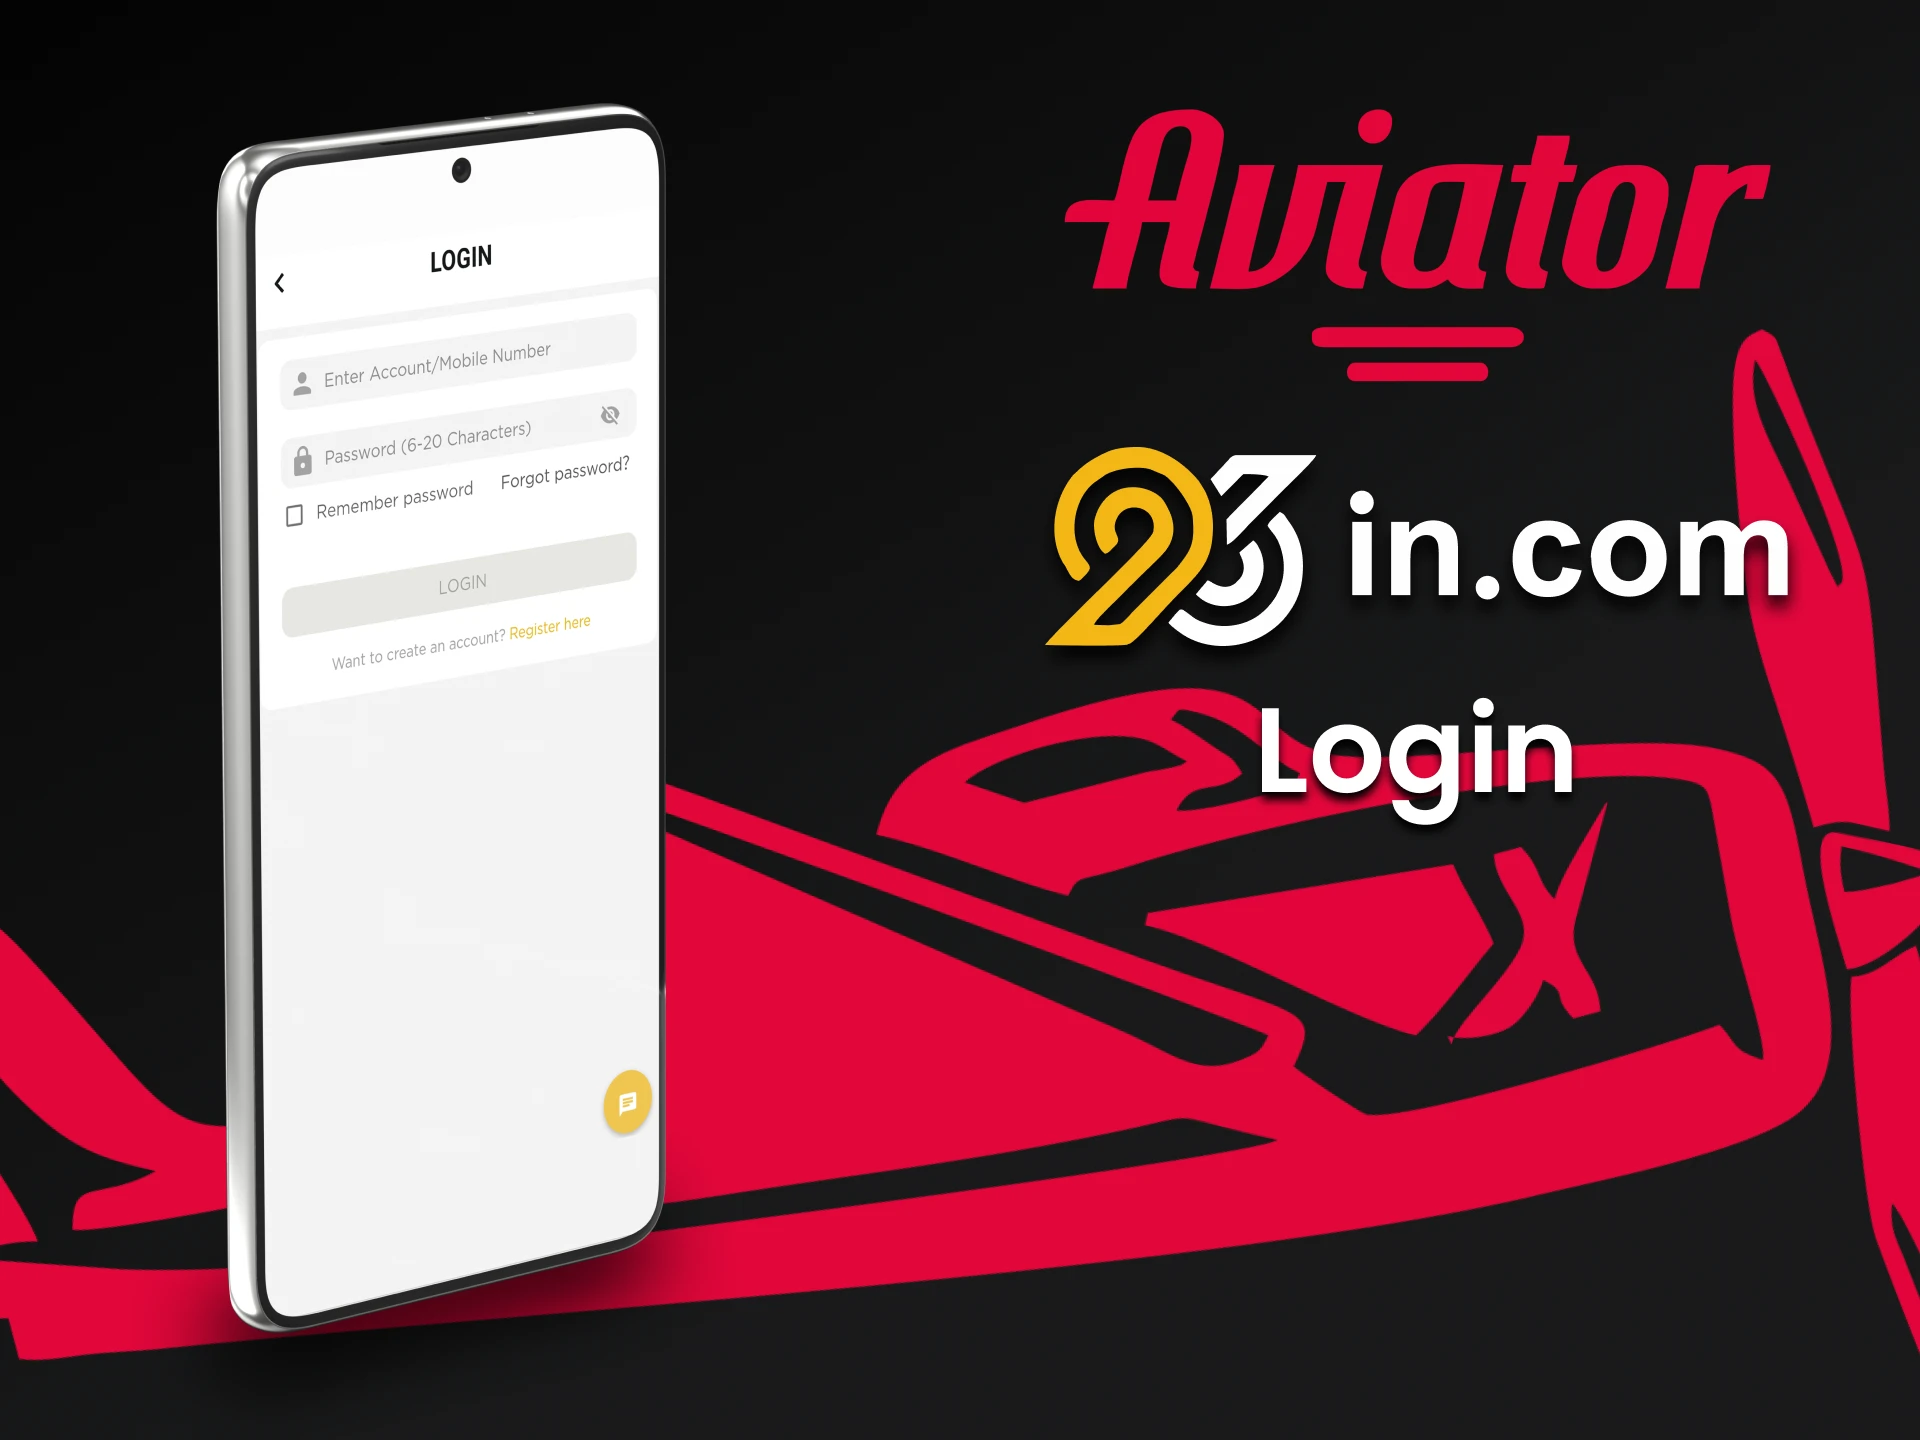 Log in to your personal account through the 96in app to play Aviator.